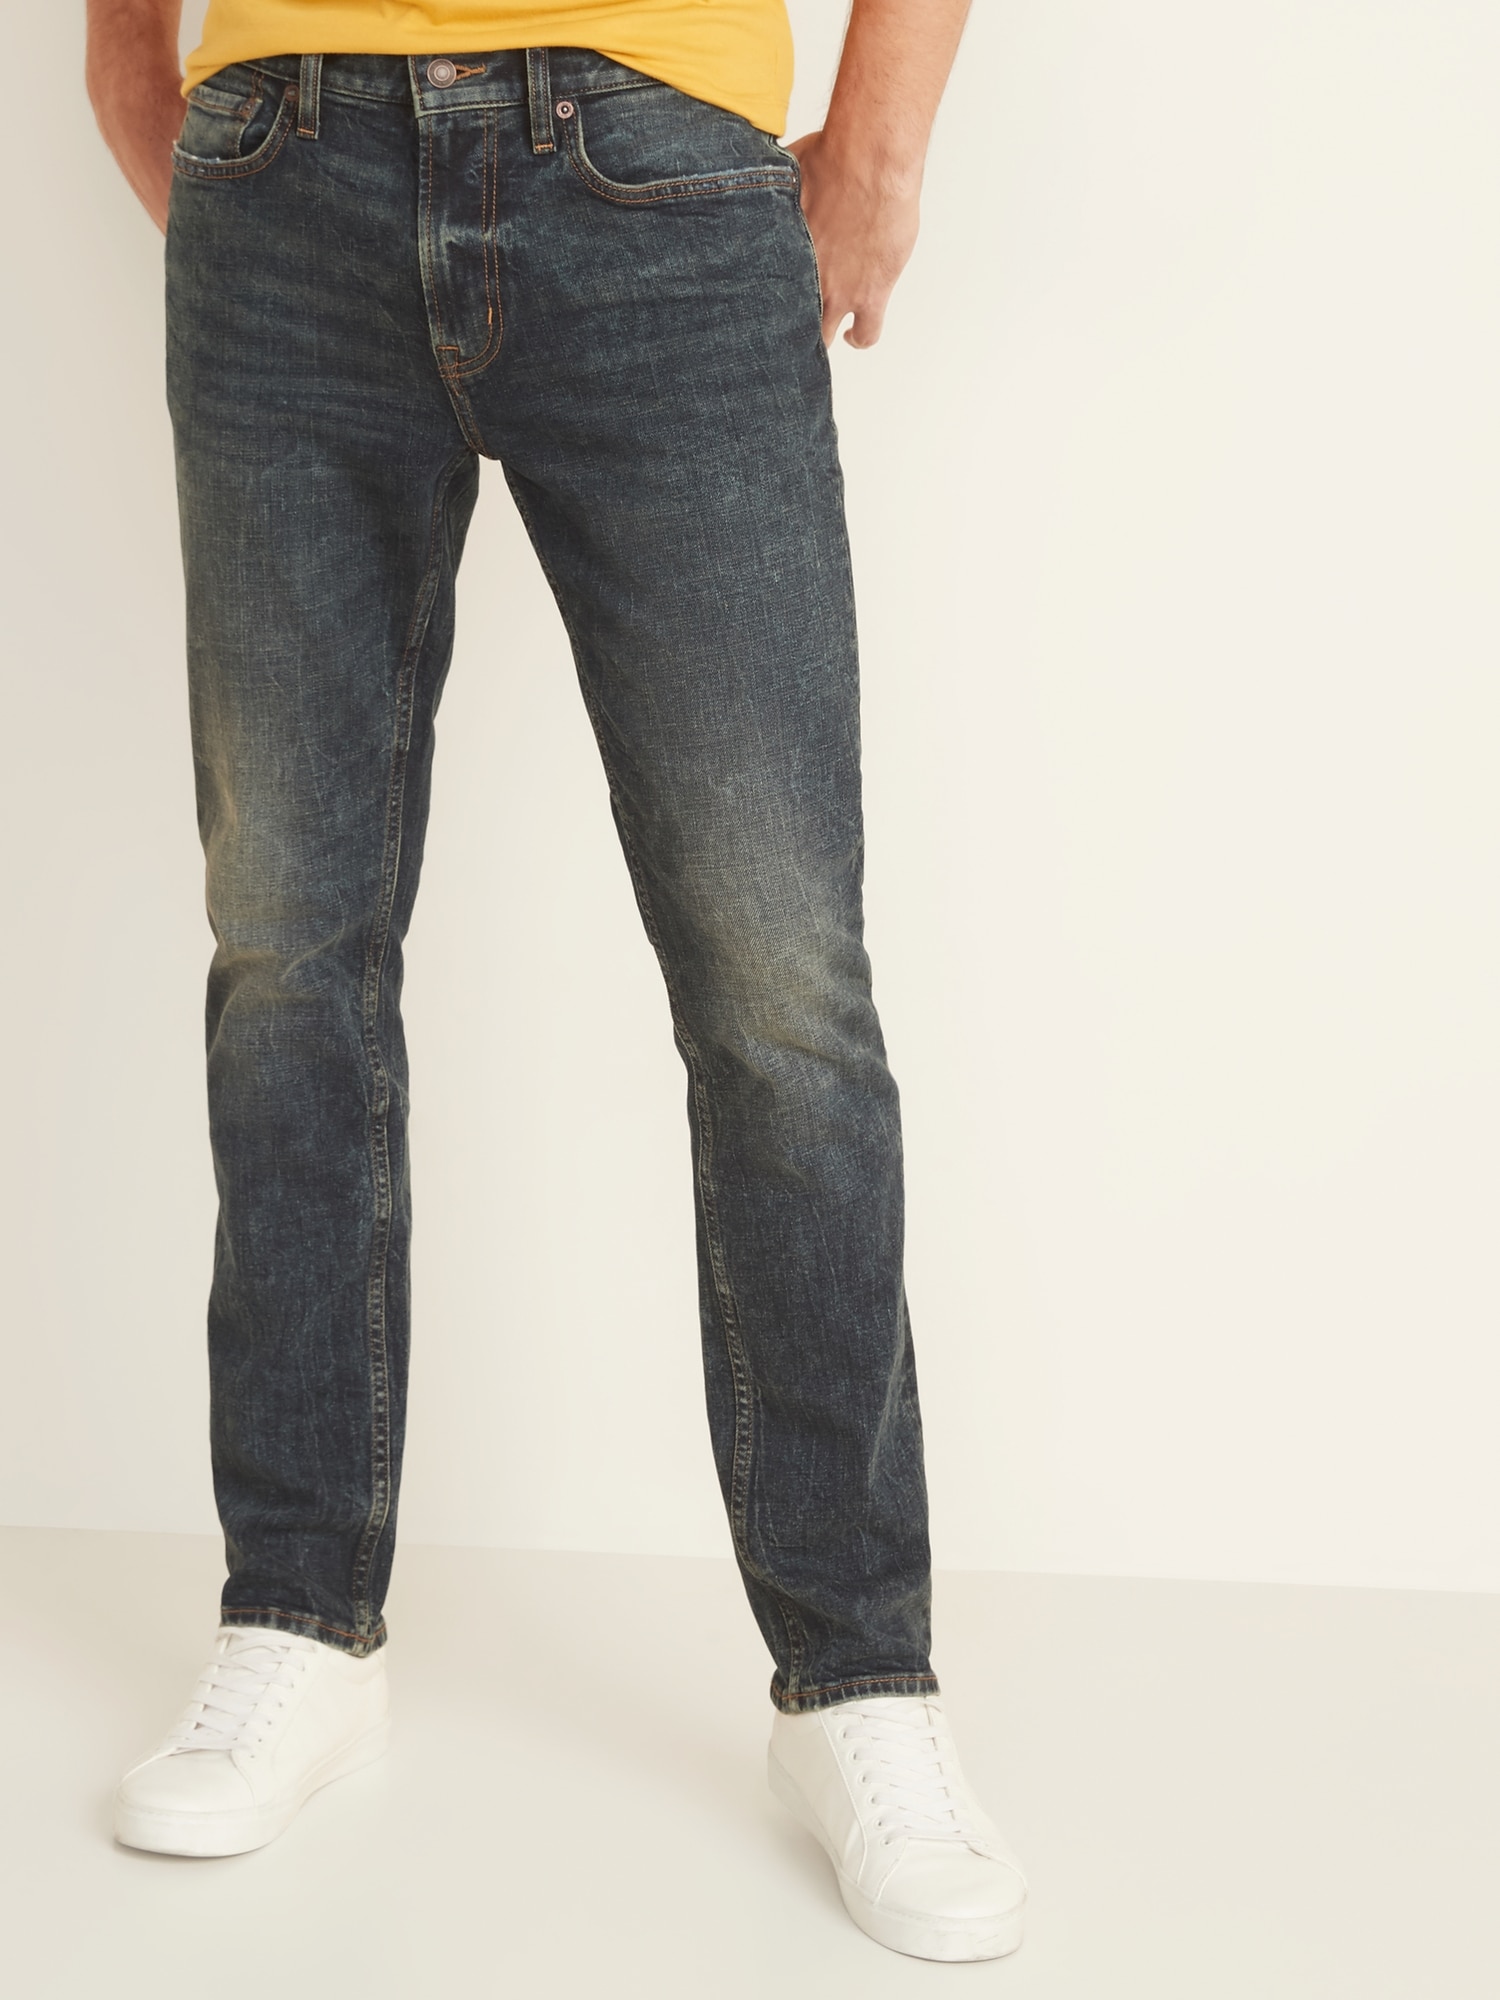 stone washed jeans black